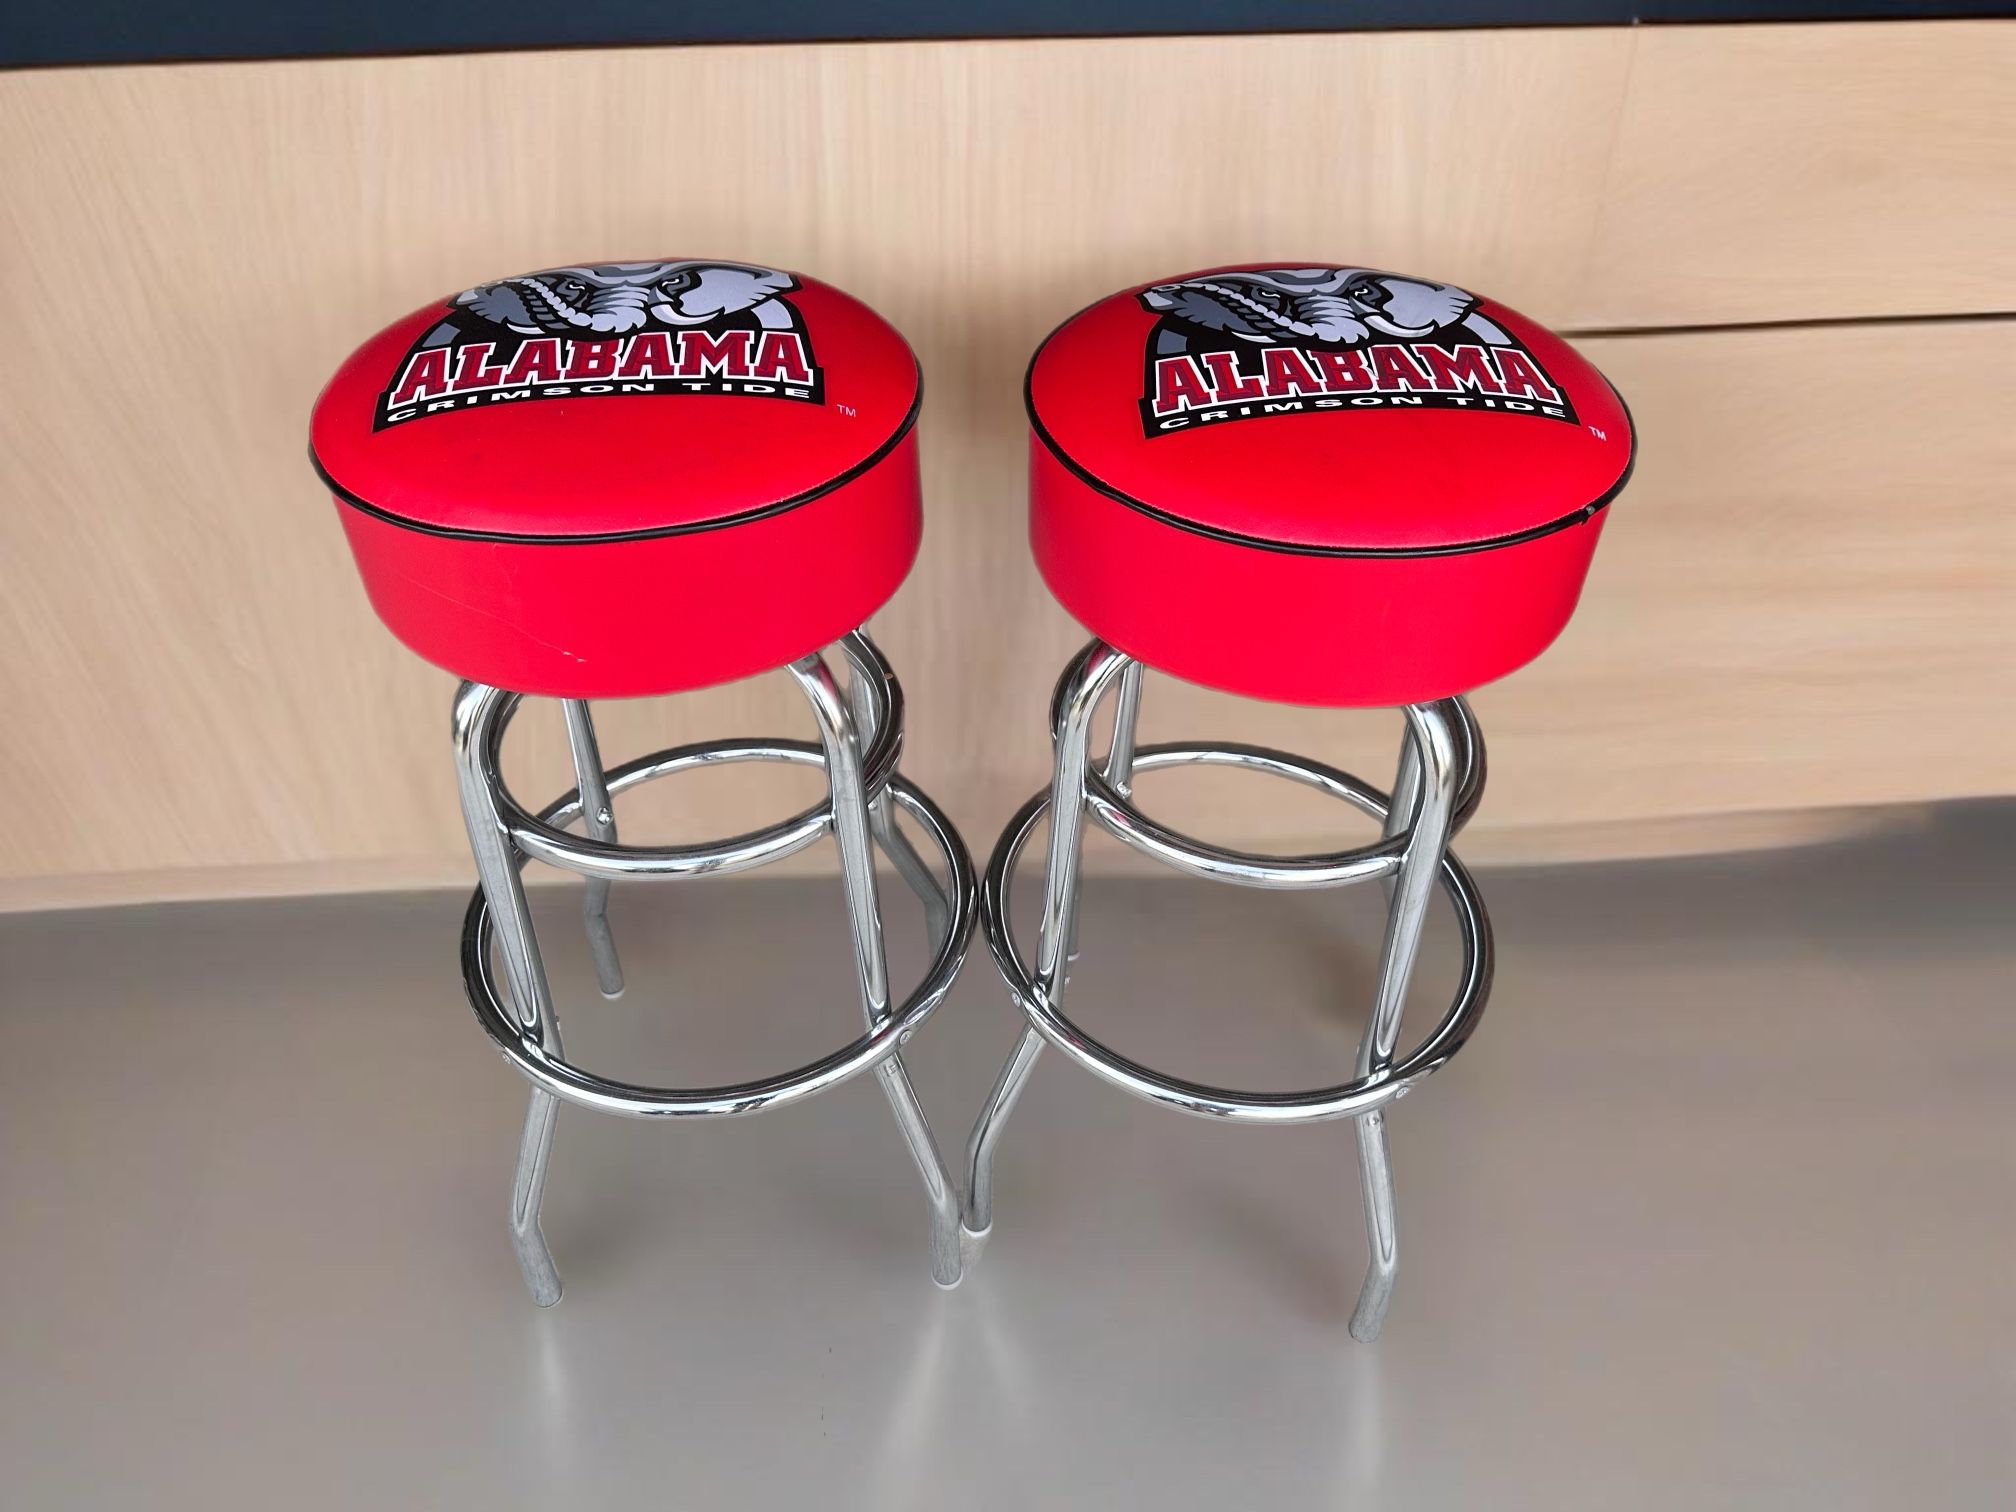 New Never Used Alabama Stools Will Drop Off 